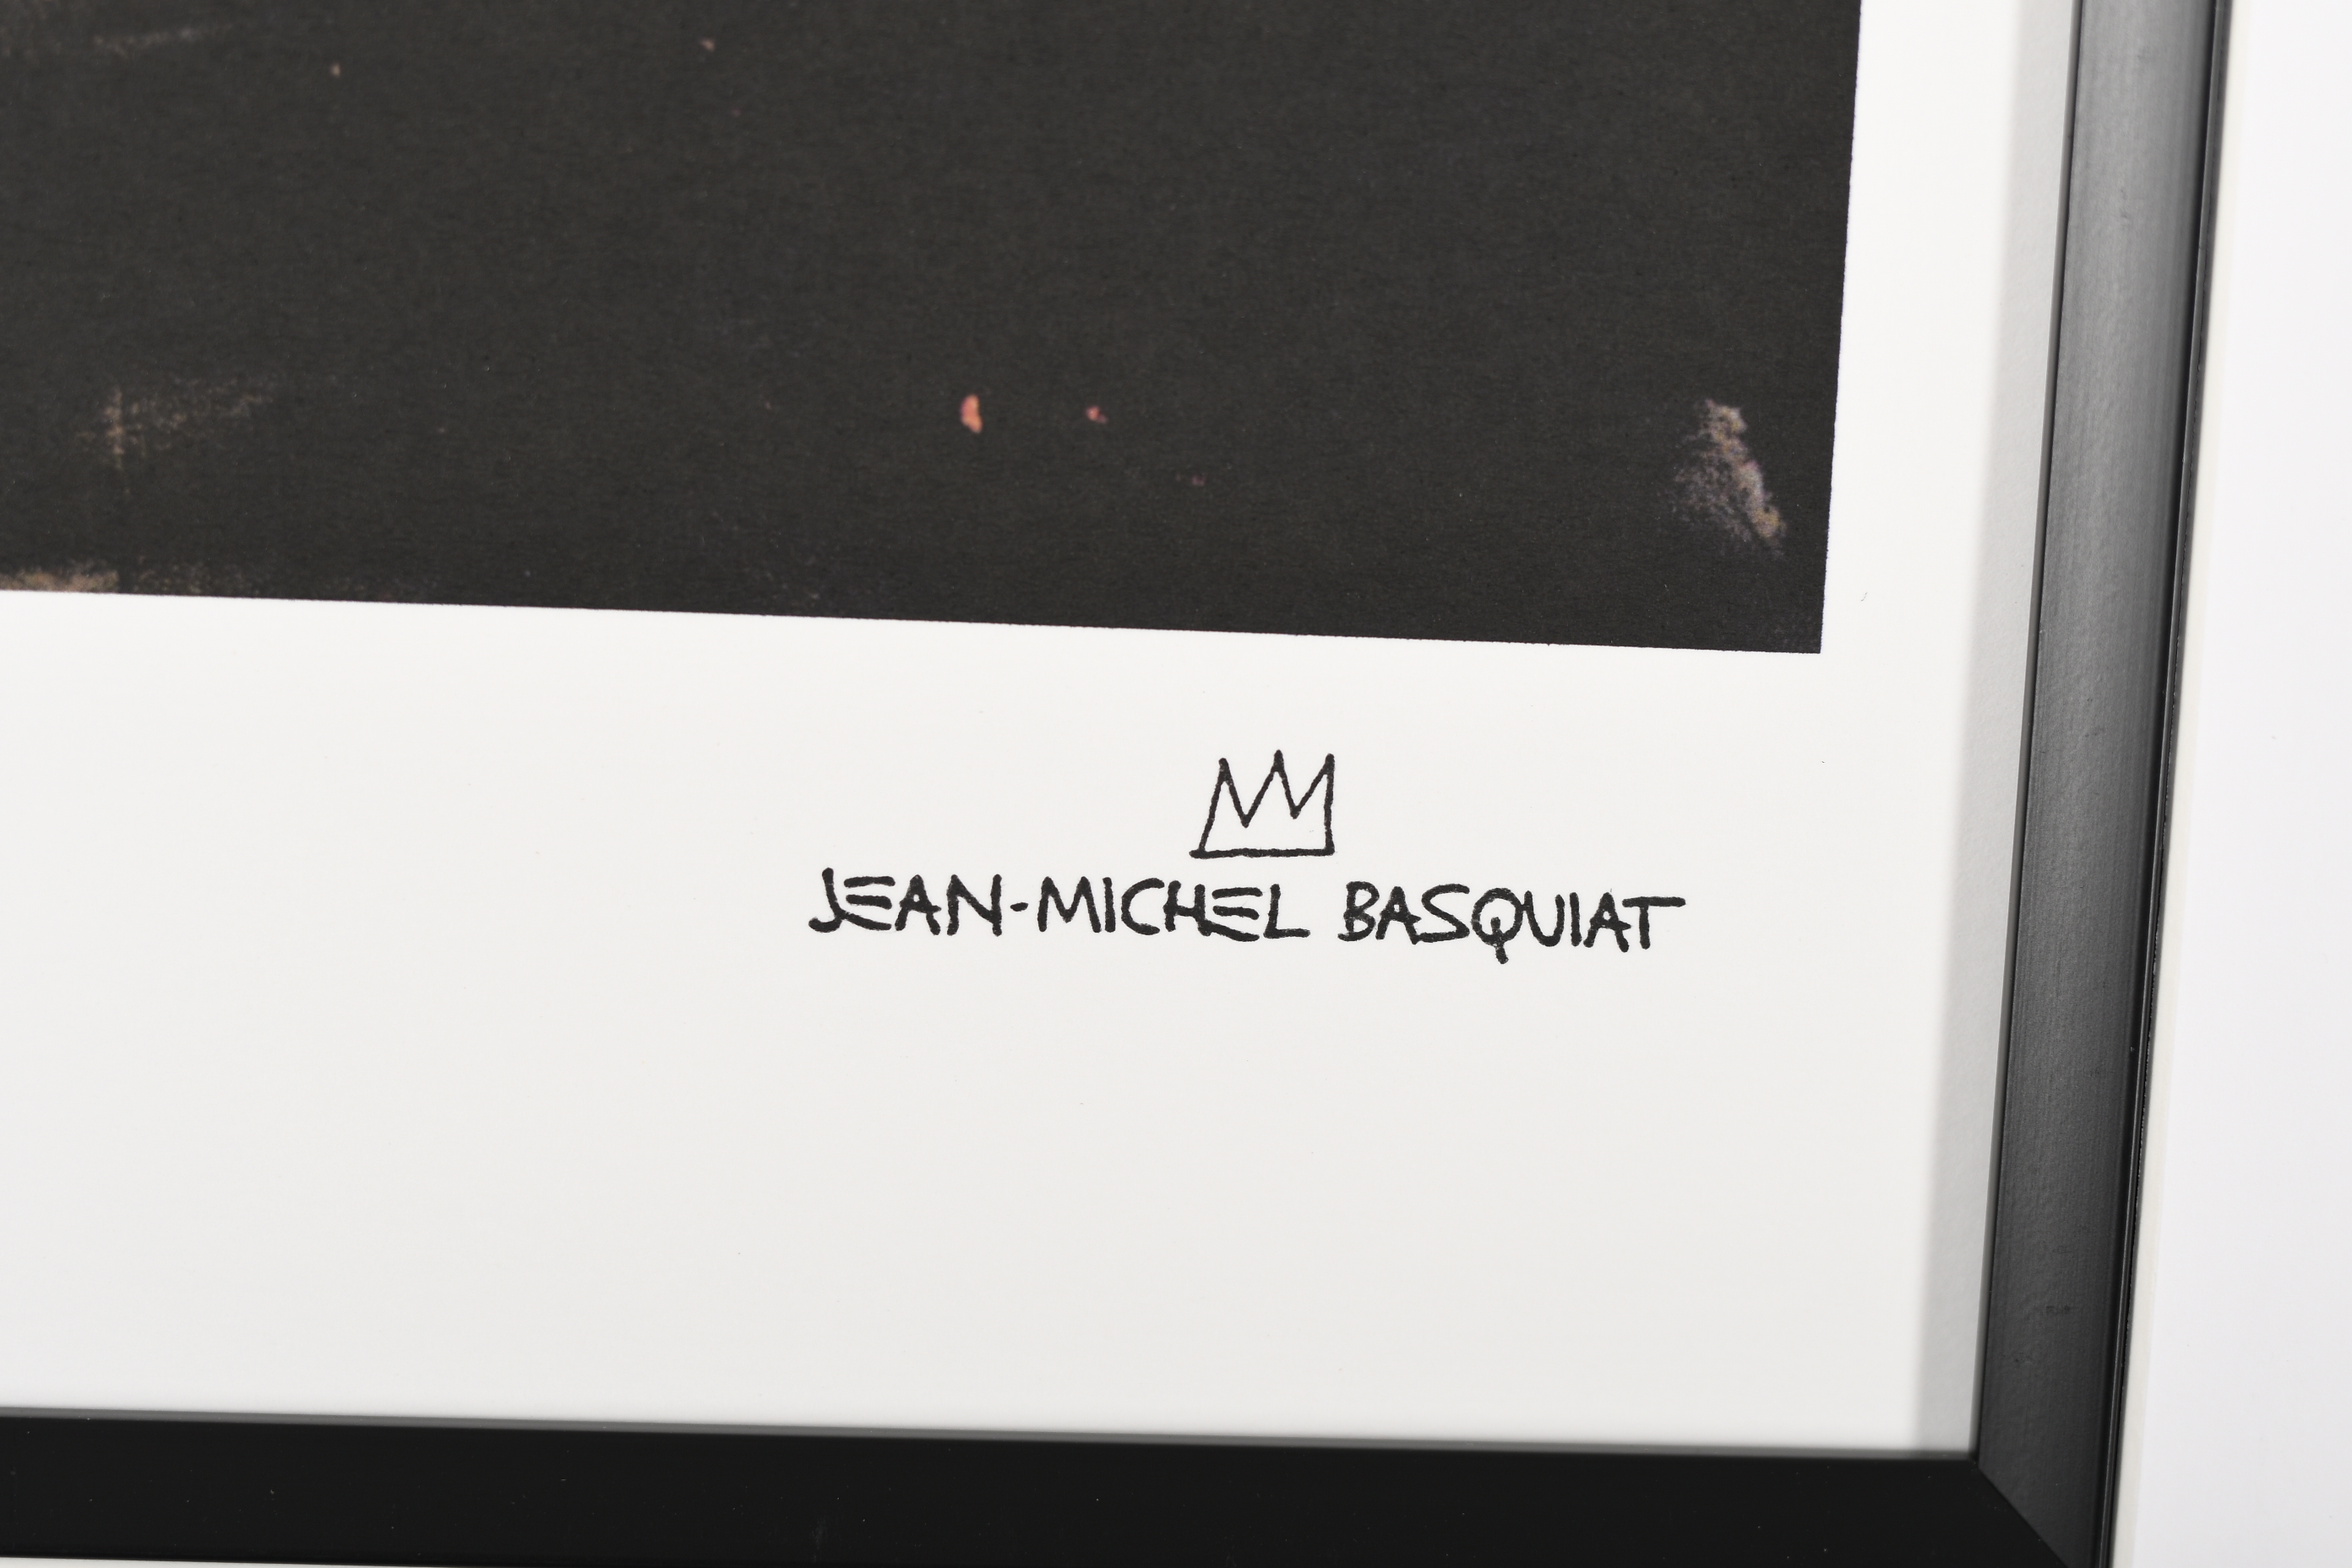 Jean-Michel Basquiat Lithograph Limited Edition - Image 3 of 7